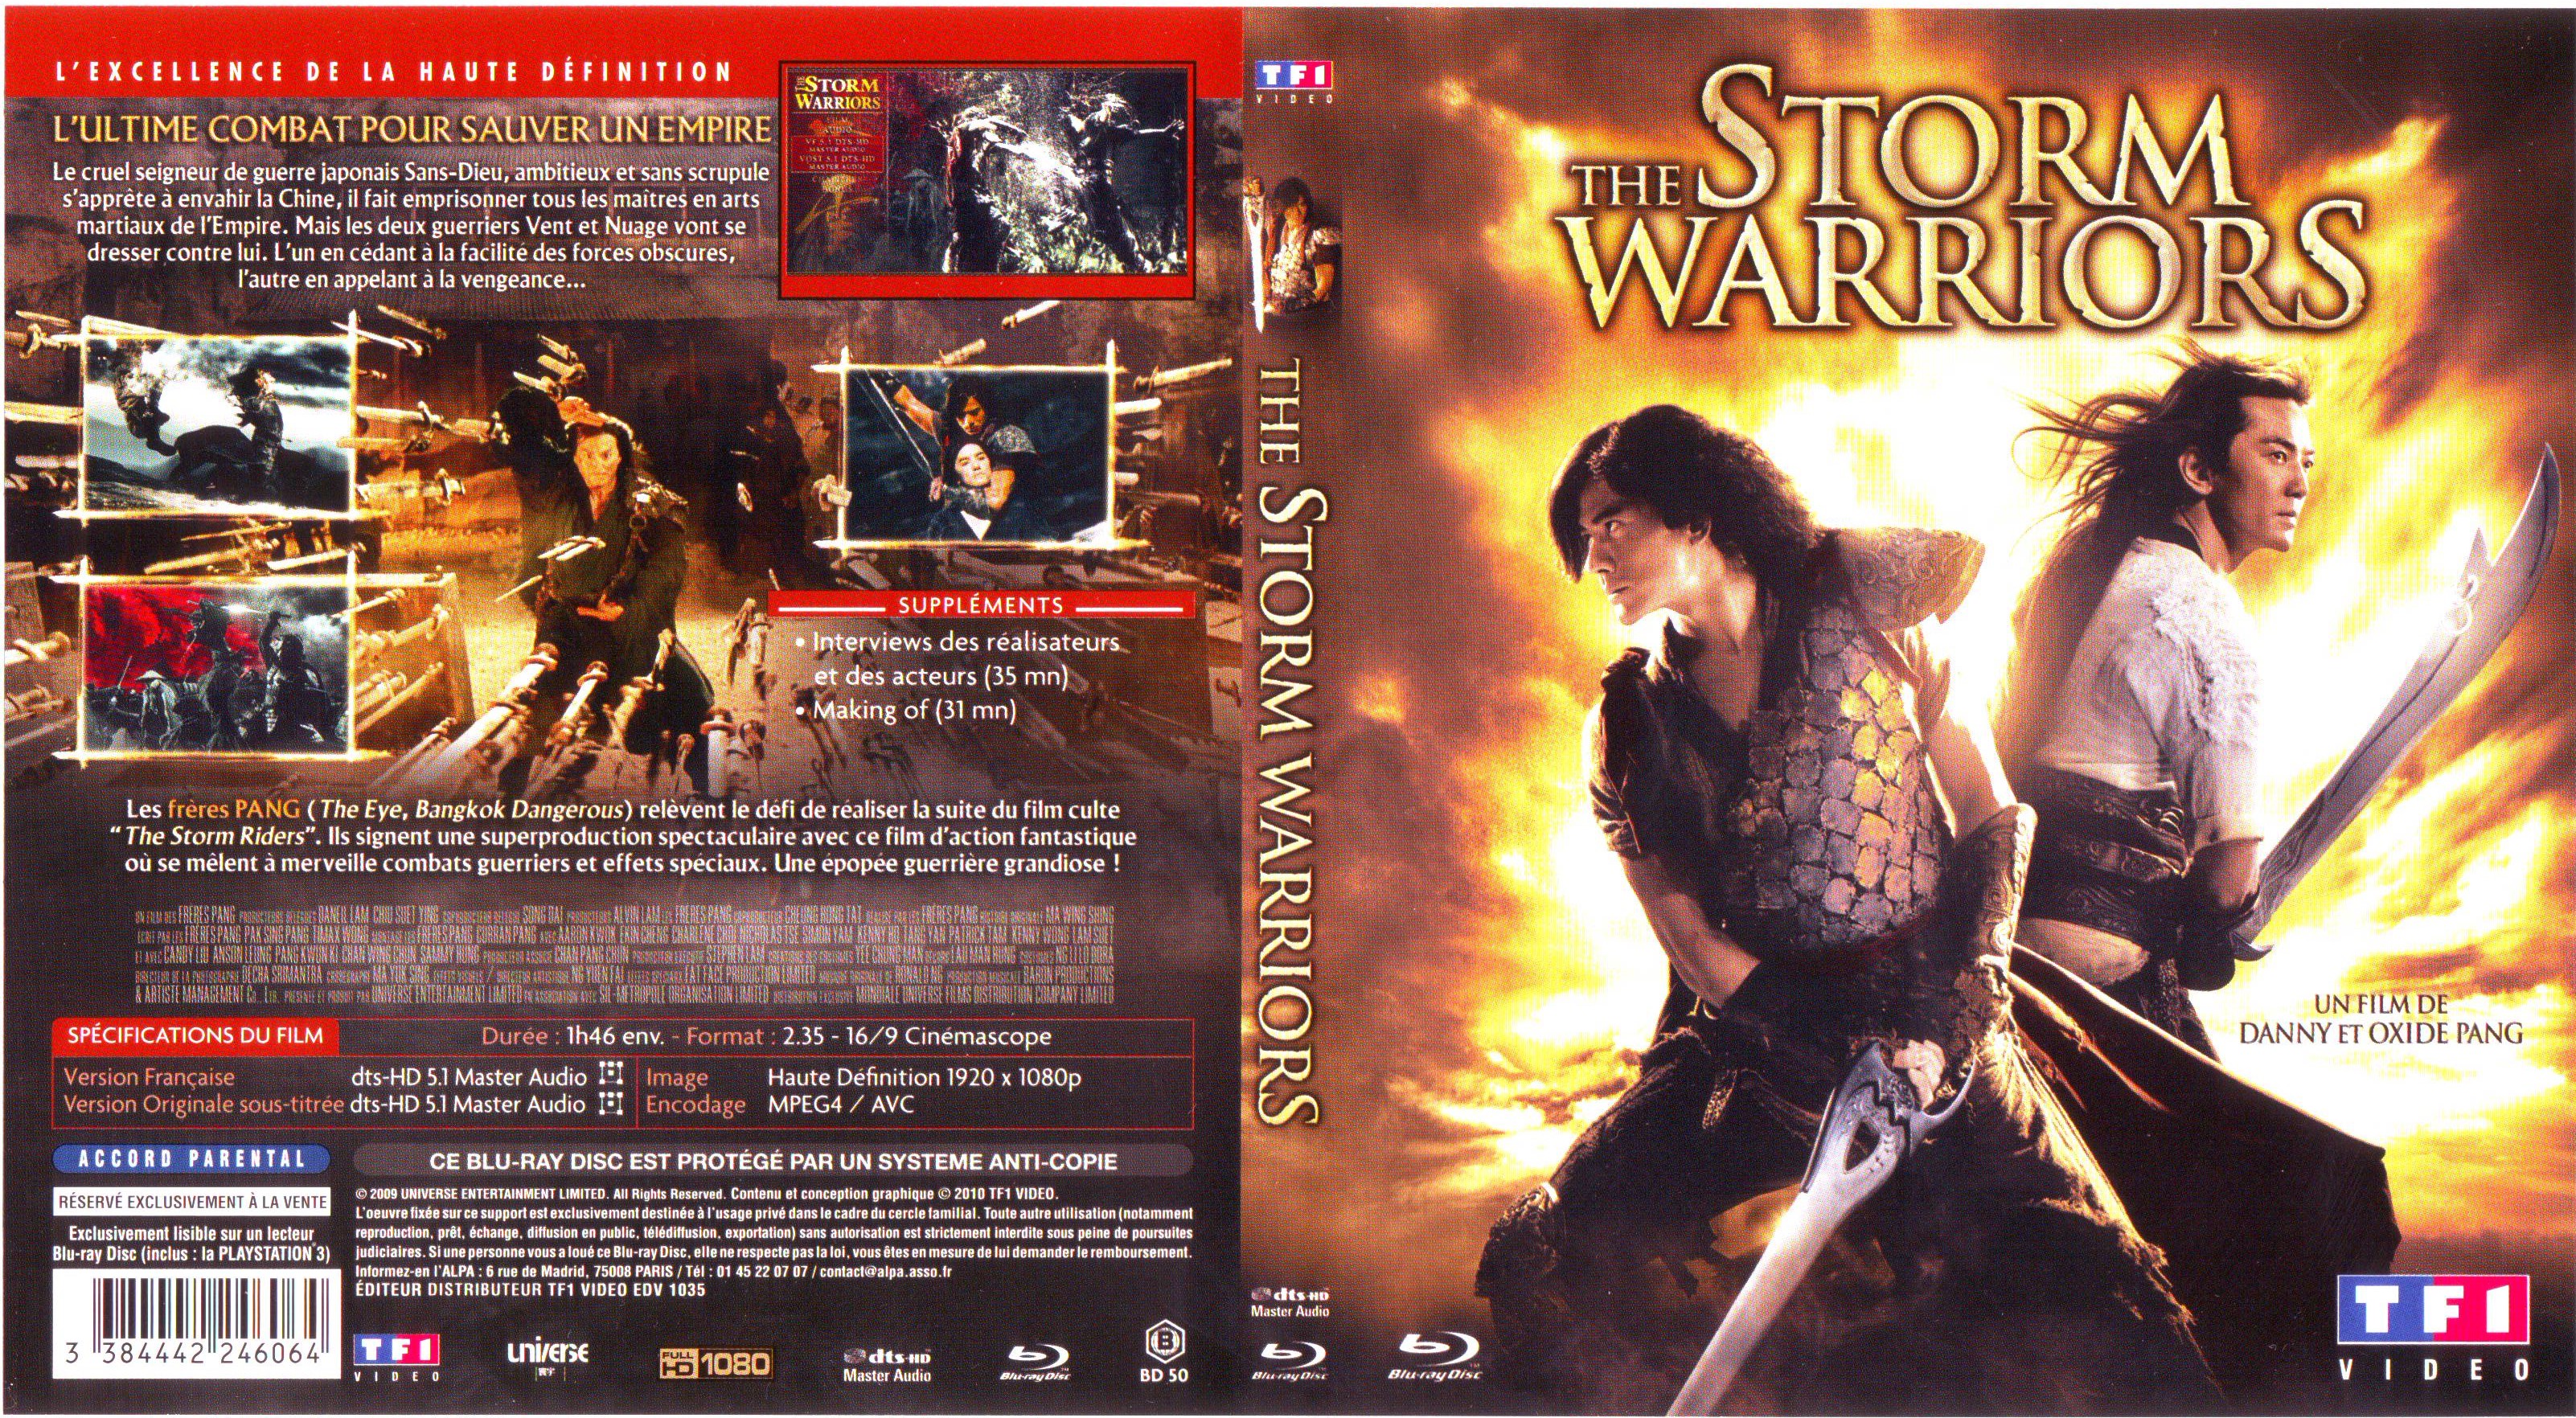 Jaquette DVD The storm warriors (BLU-RAY)